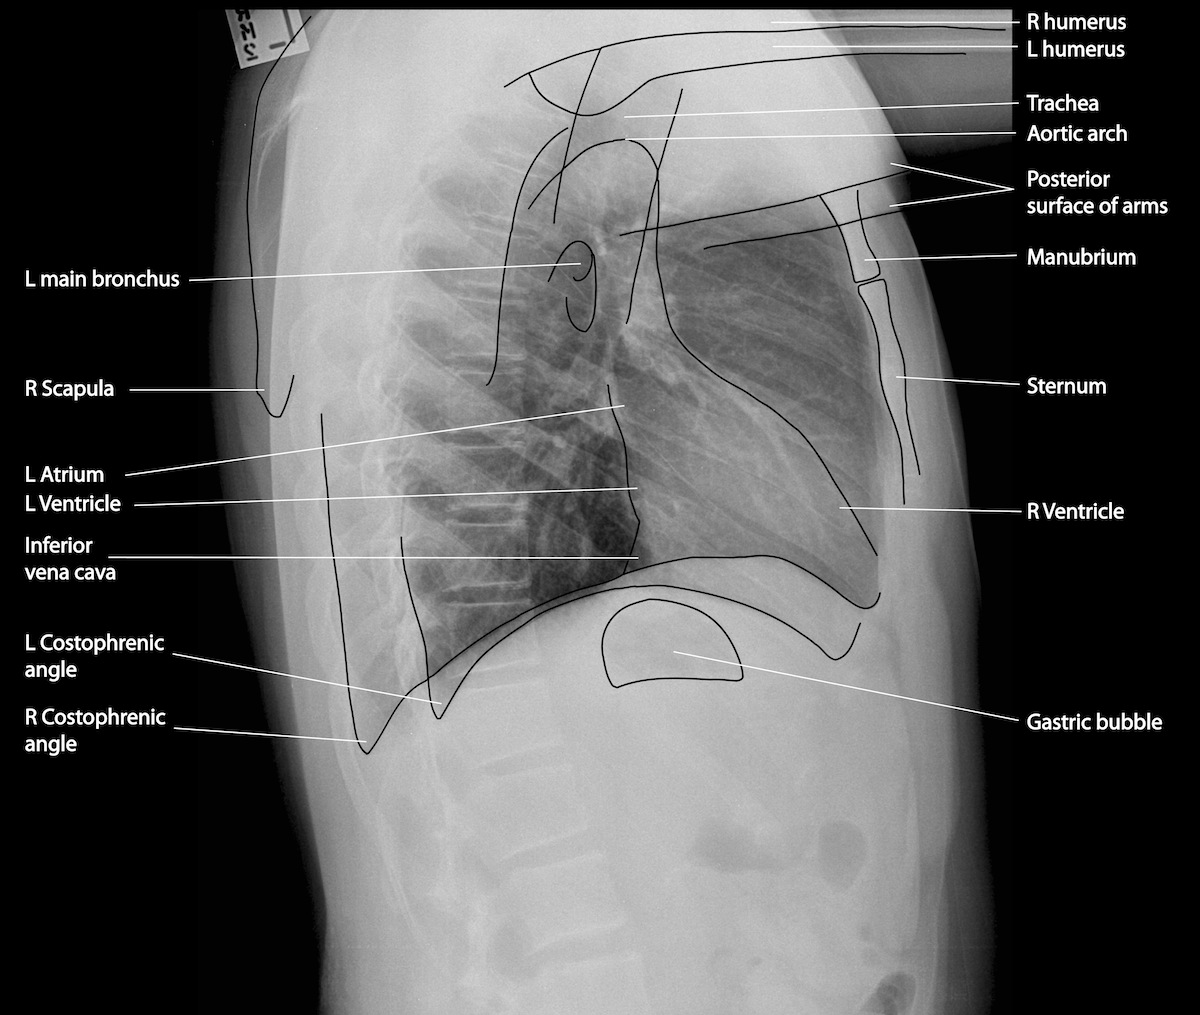 Anatomical landmarks on a later chest X-ray (source) 